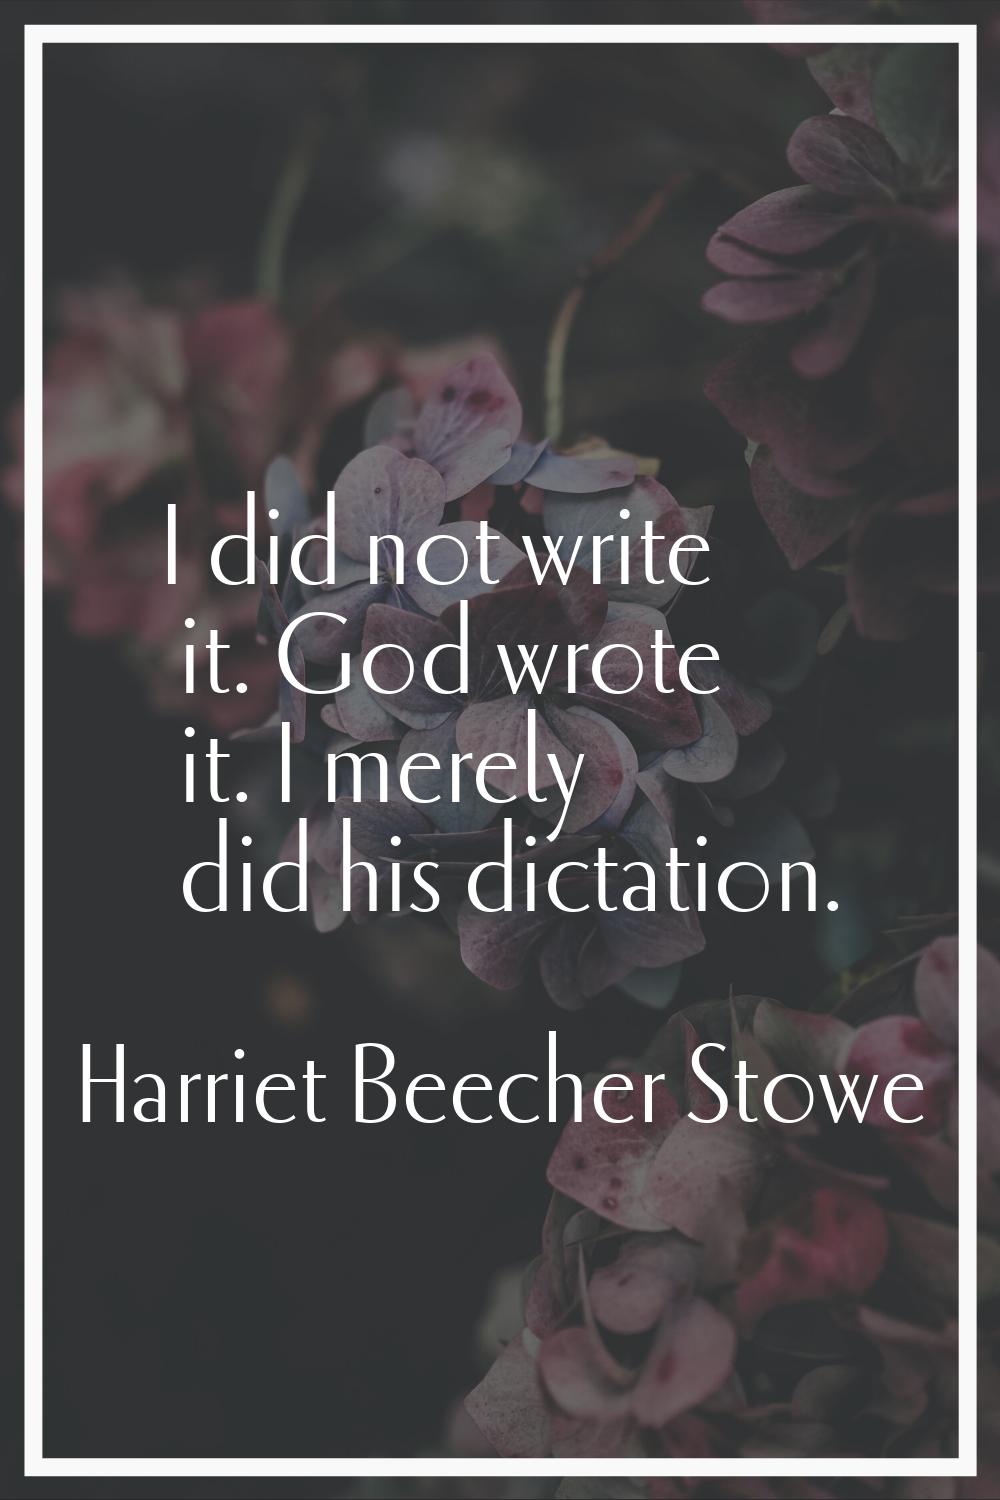 I did not write it. God wrote it. I merely did his dictation.